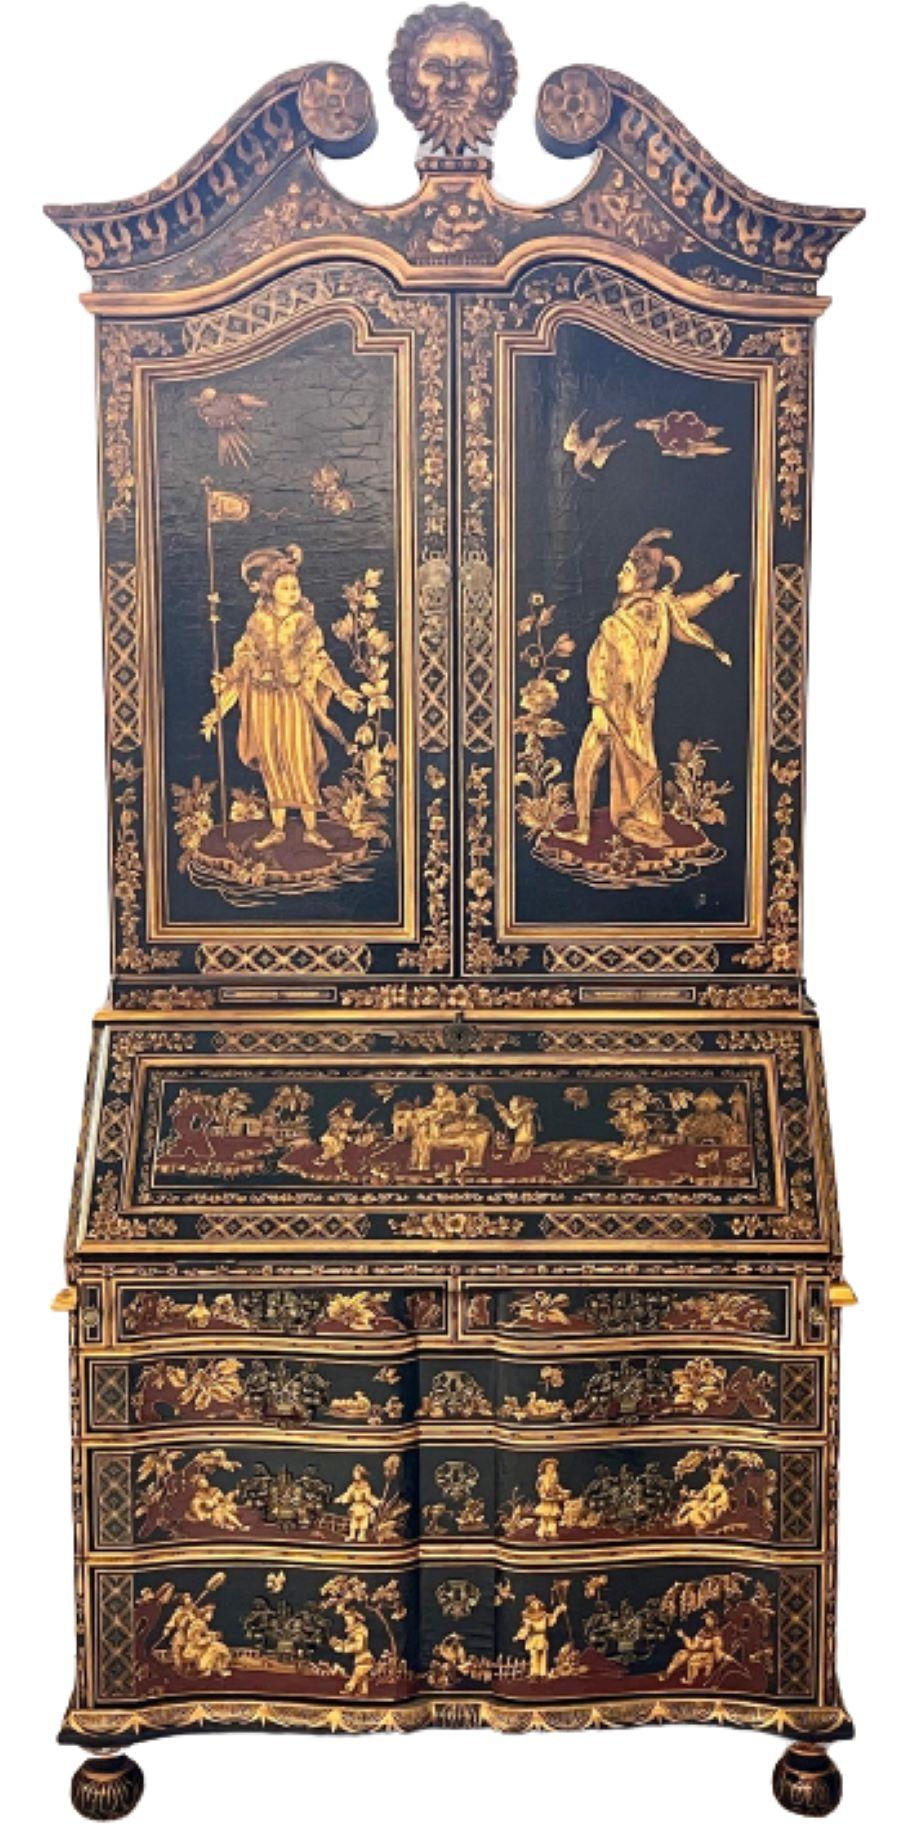 Chinoiserie carved black lacquer secretary desk having a black lacquer and gilt slant top and matching serpentine base. A simply stunning overstated piece having multiple compartments and painted raised carved detail throughout. The large center